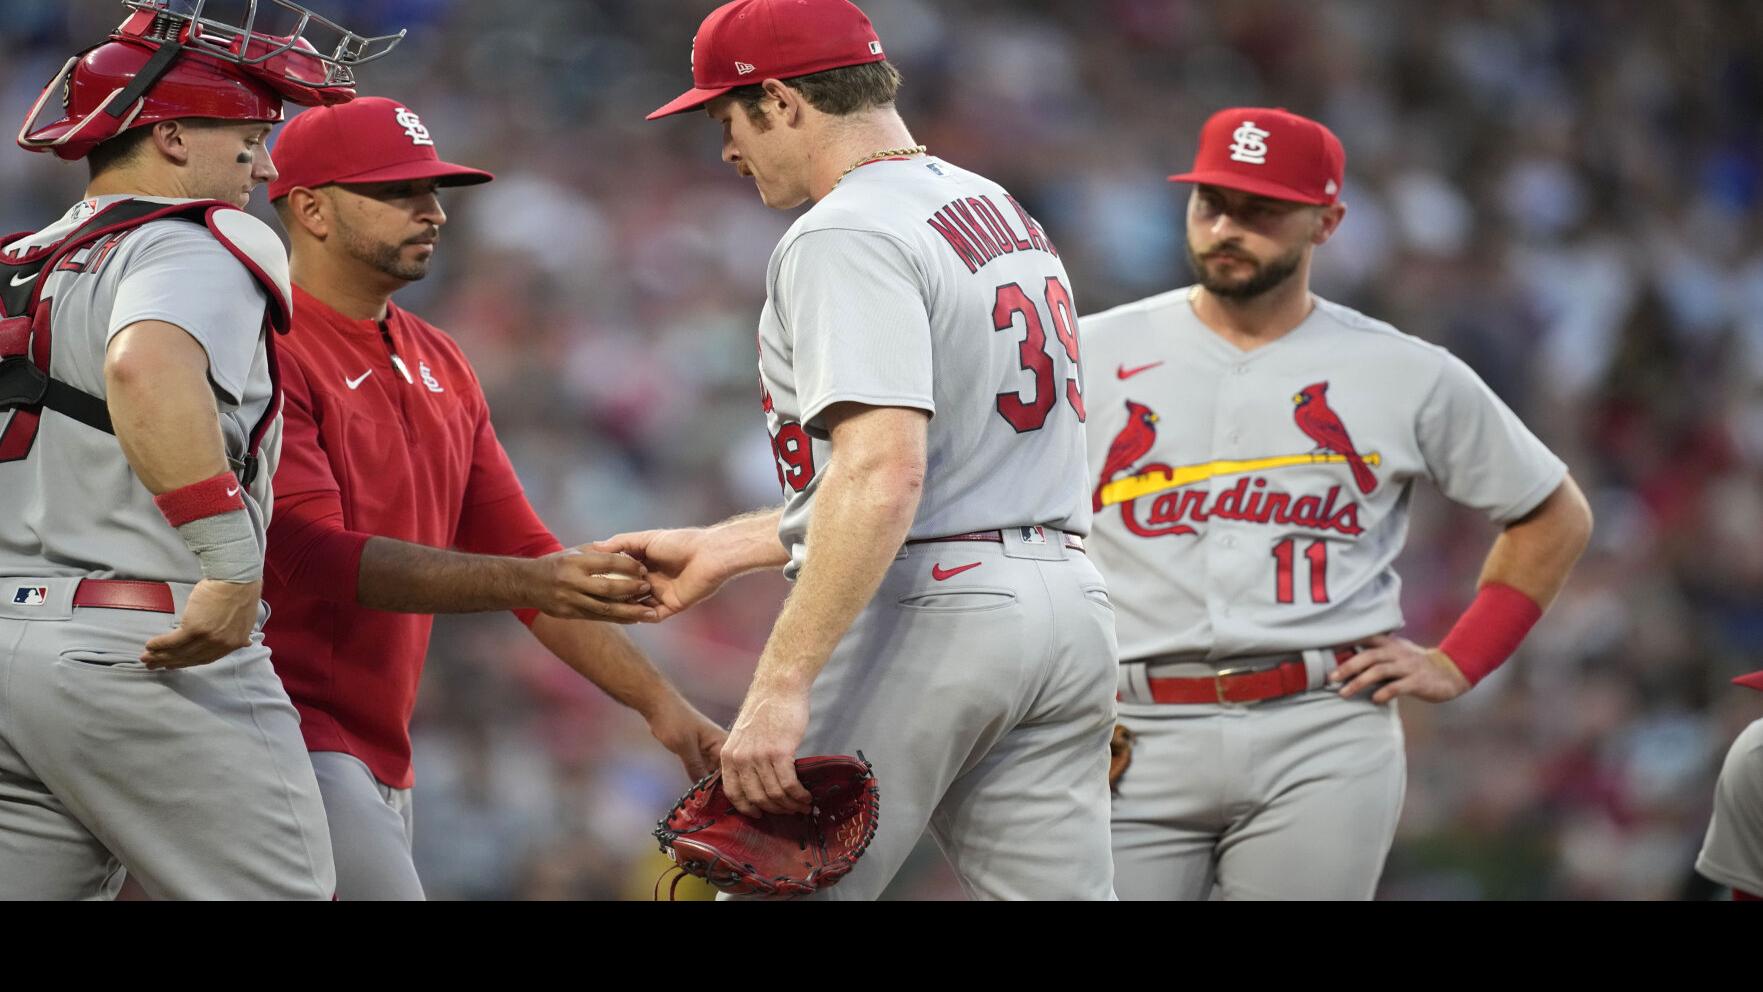 Sweet streak ends with stinker: Cardinals Miles Mikolas rocked by 'a thousand paper cuts'